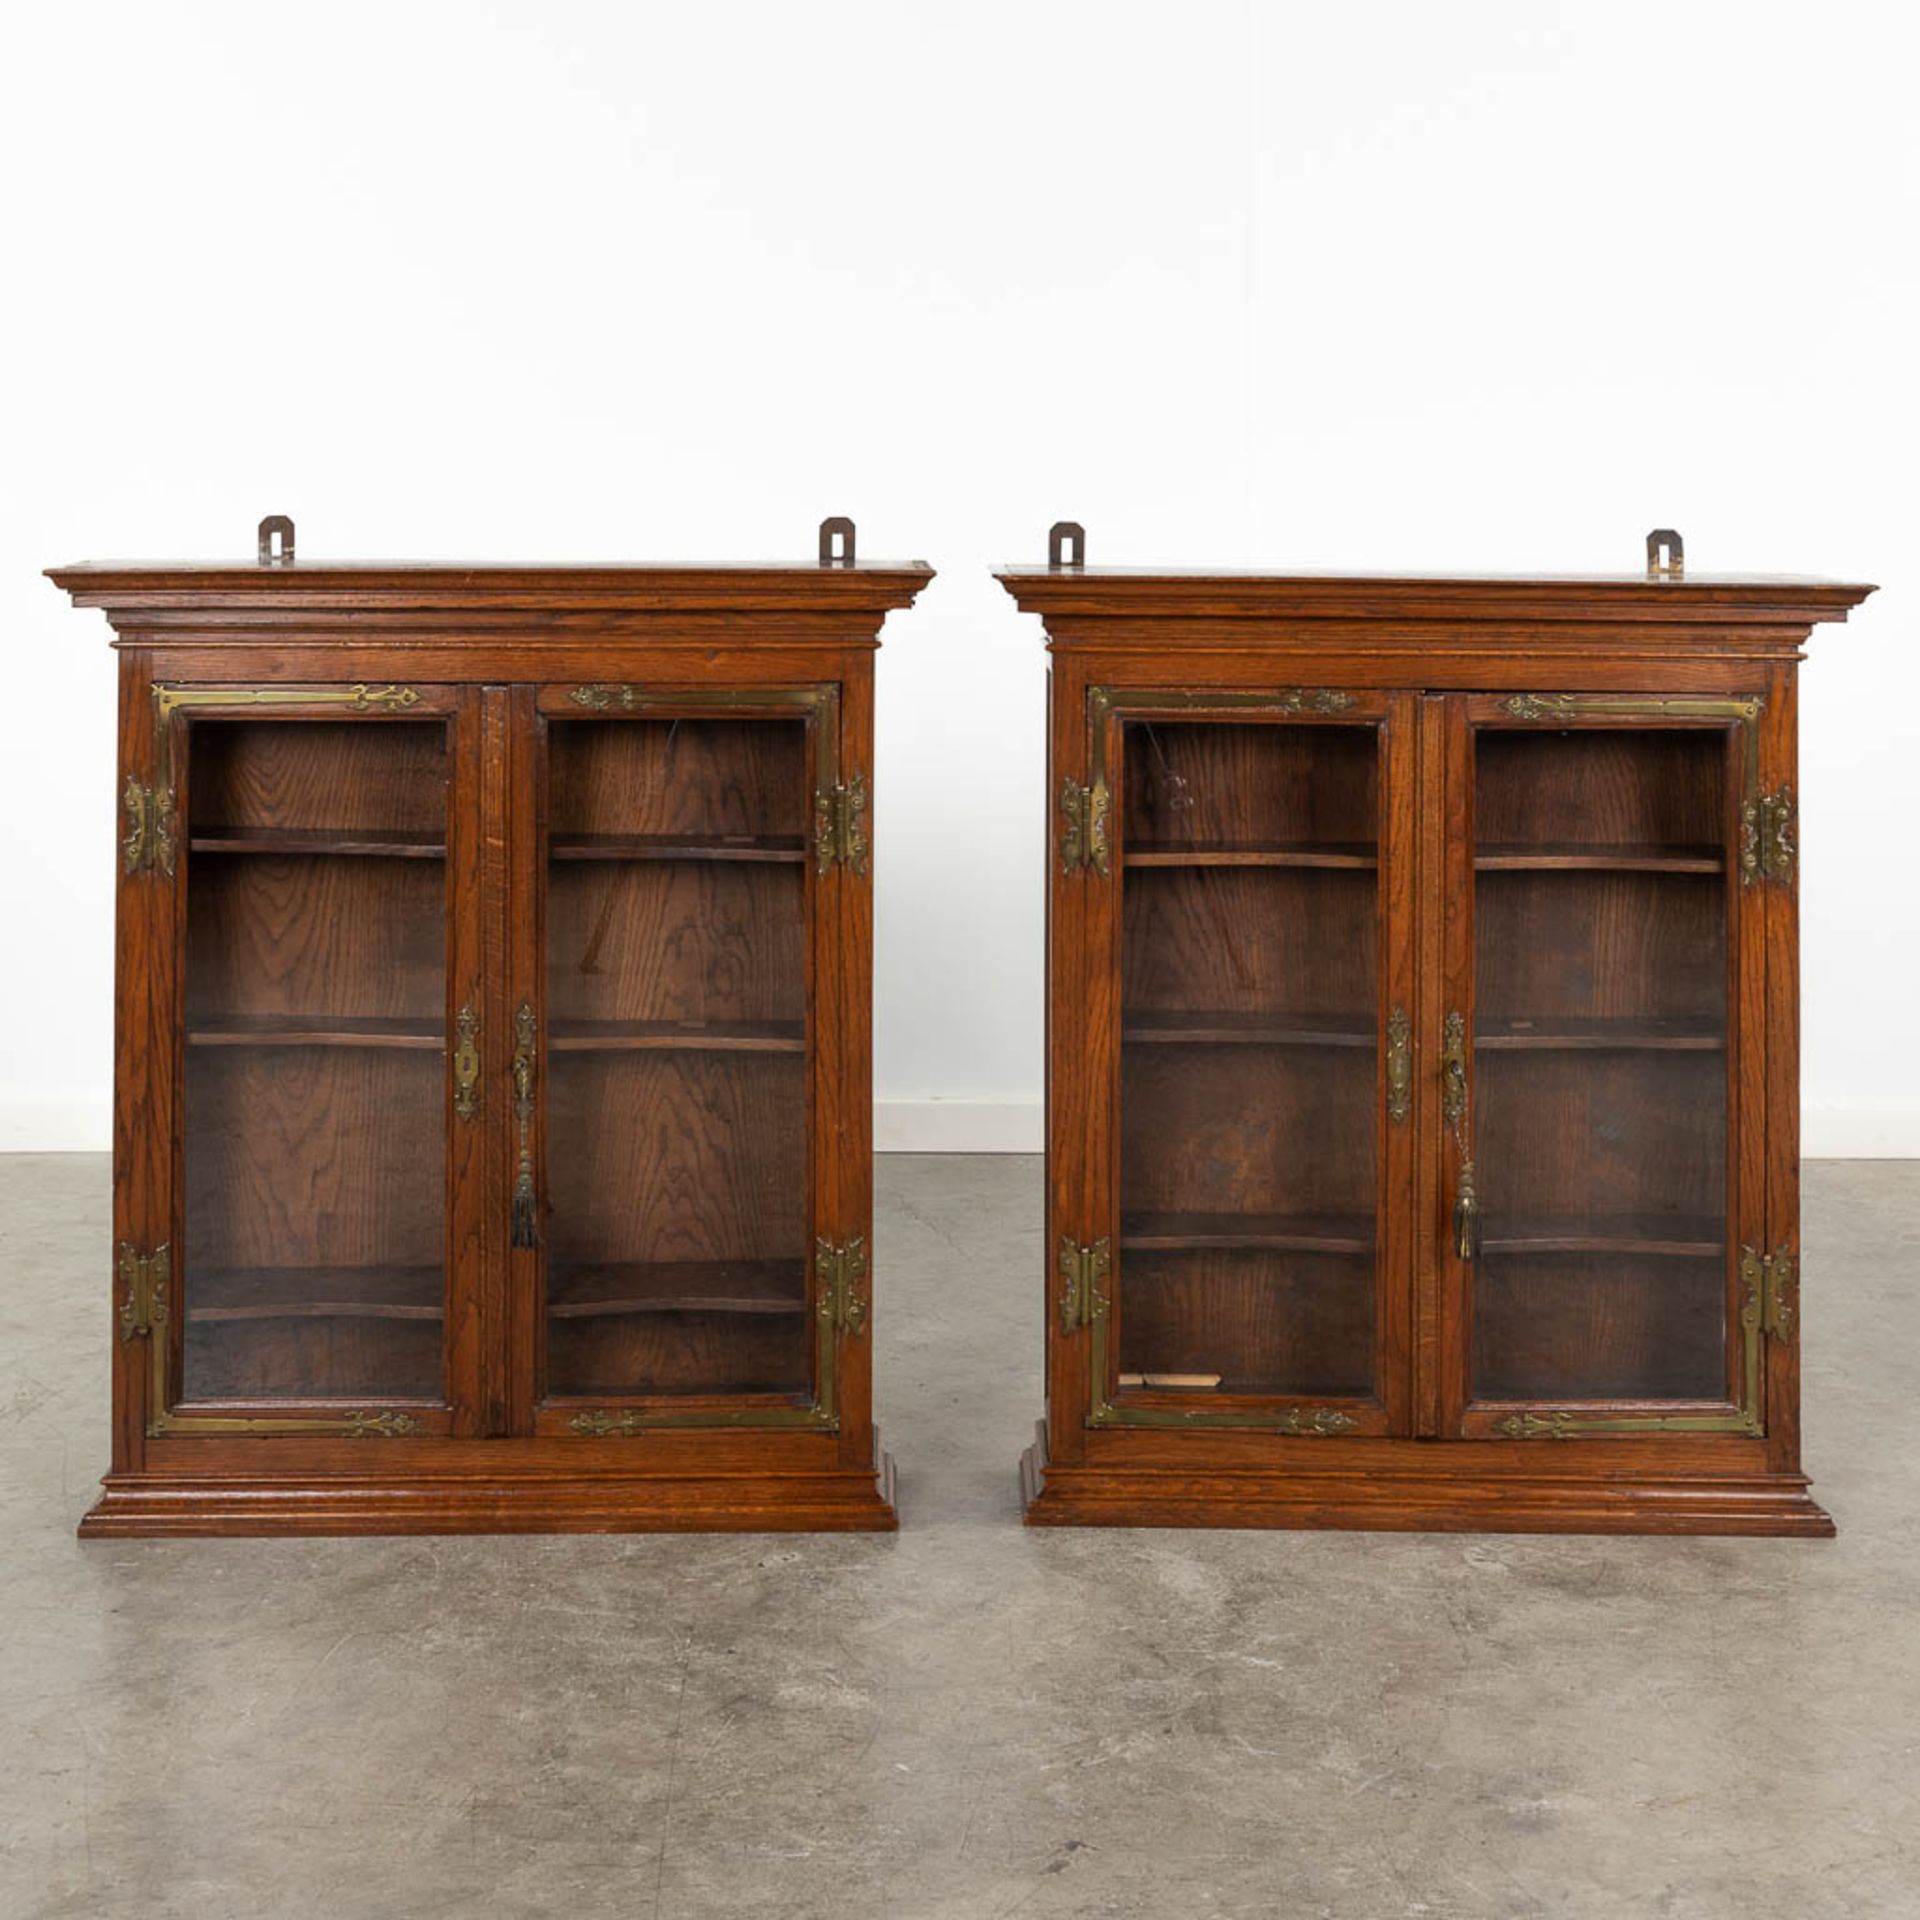 A pair of hanging cabinets, wood and glass. Circa 1900. (L: 17 x W: 75 x H: 83 cm) - Image 3 of 9